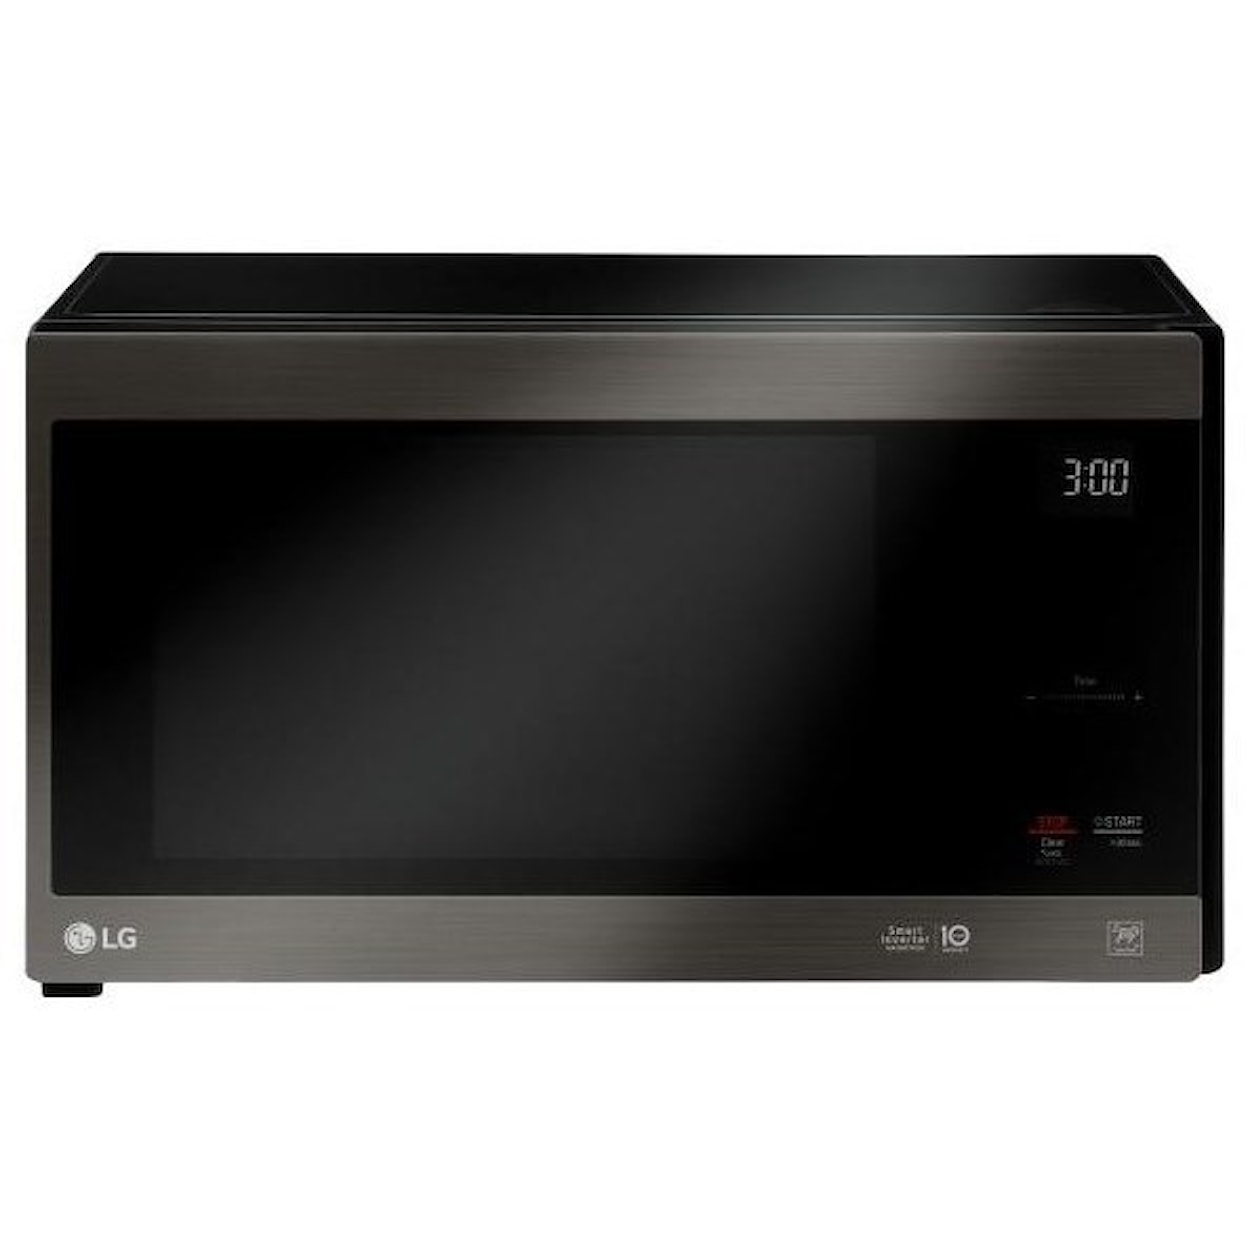 LG Appliances Microwaves- LG 1.5 cu. ft. NeoChef™ Countertop Microwave